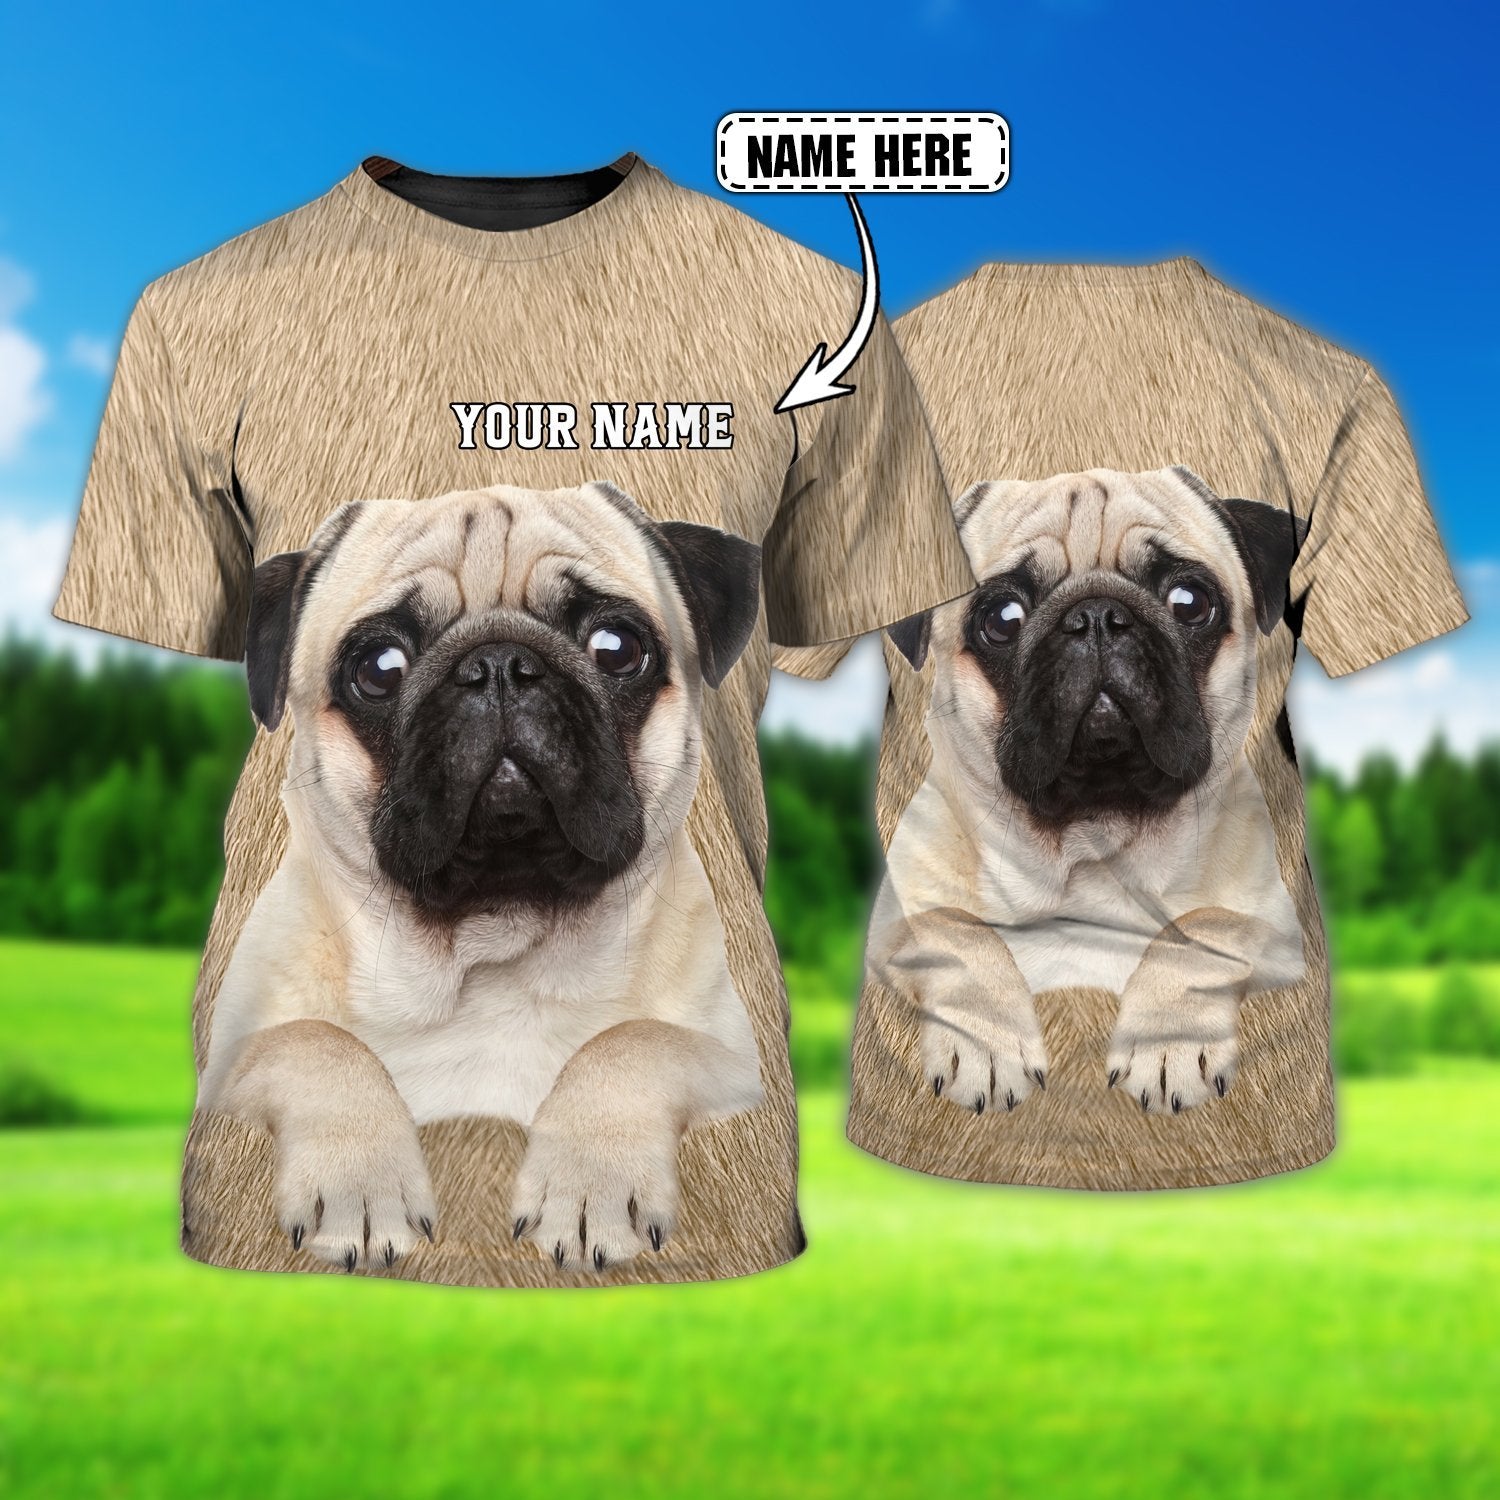 Personalized 3D All Over Printed Pug On Shirts/ Dog Shirt For Men Women/ Coolspod Shirt For Dog Lovers